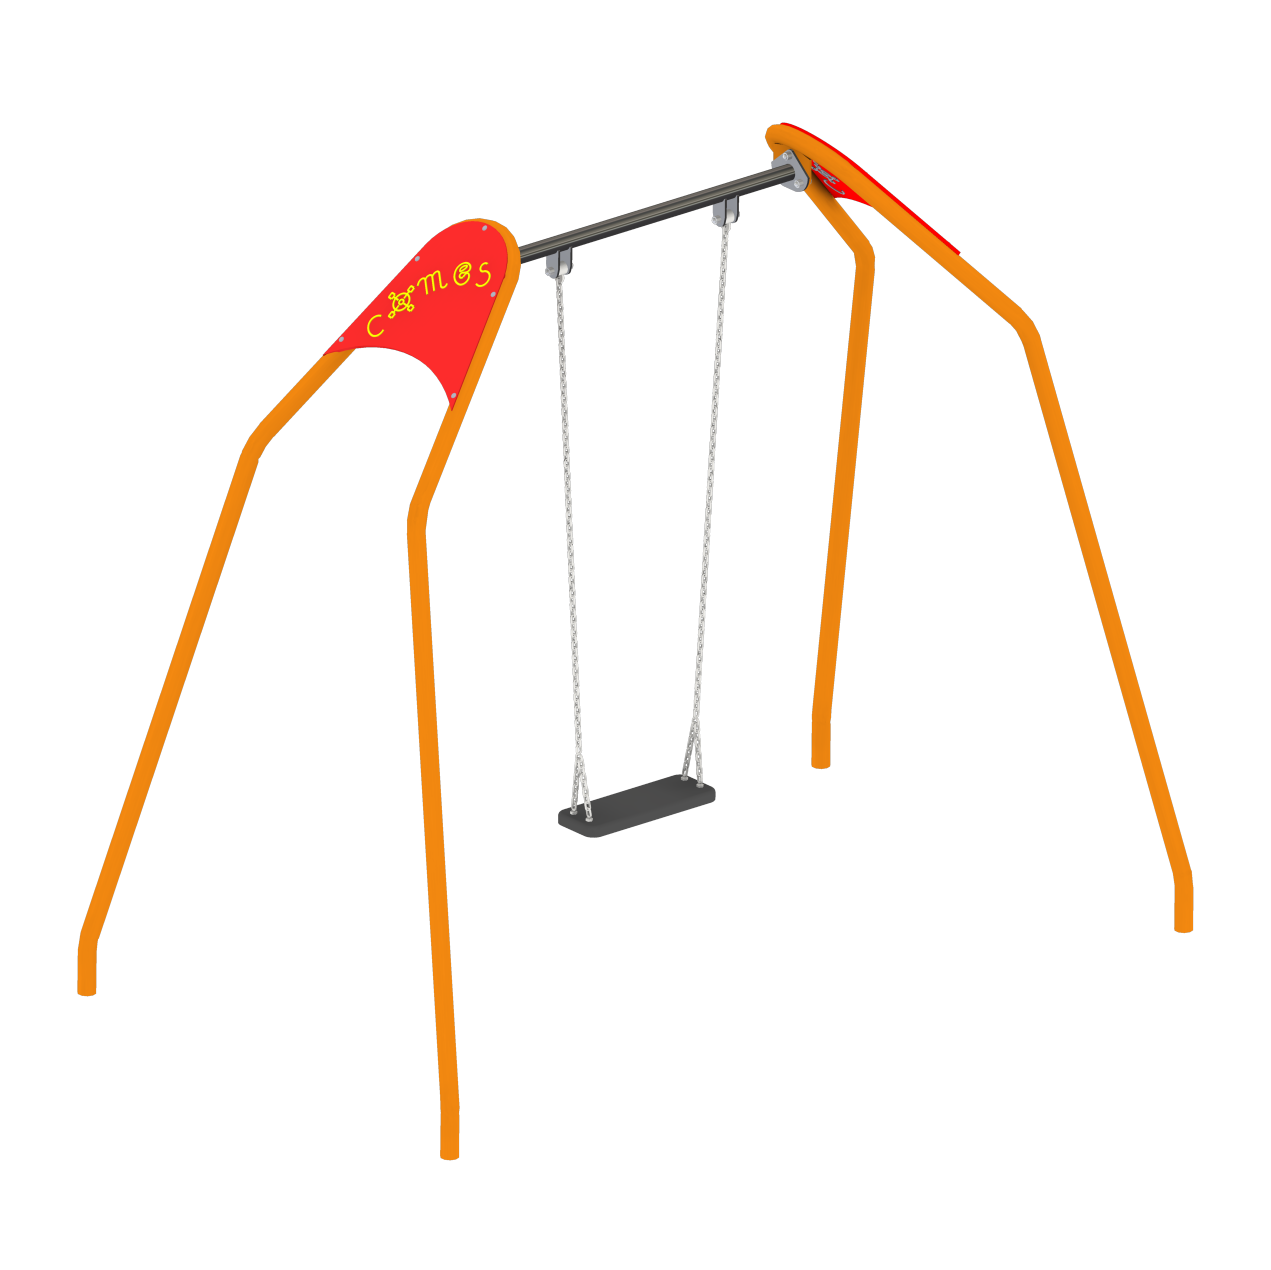 Swing for the playground